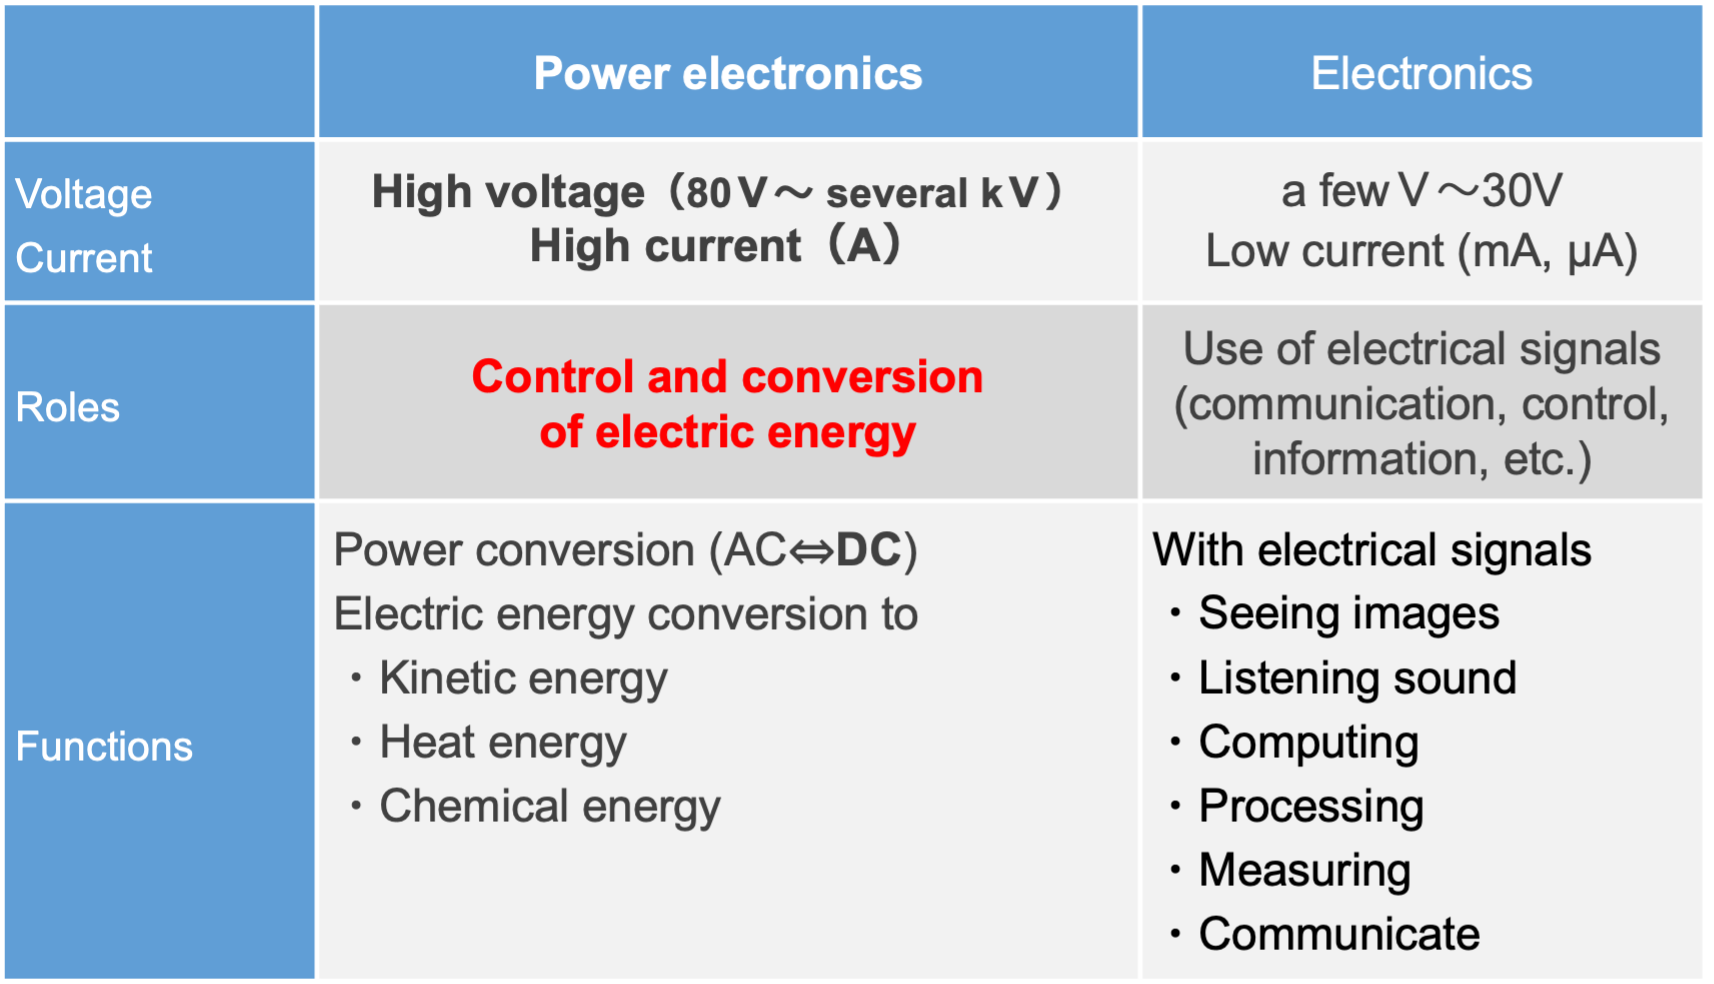 Table 1 The difference between power electronics and electronics